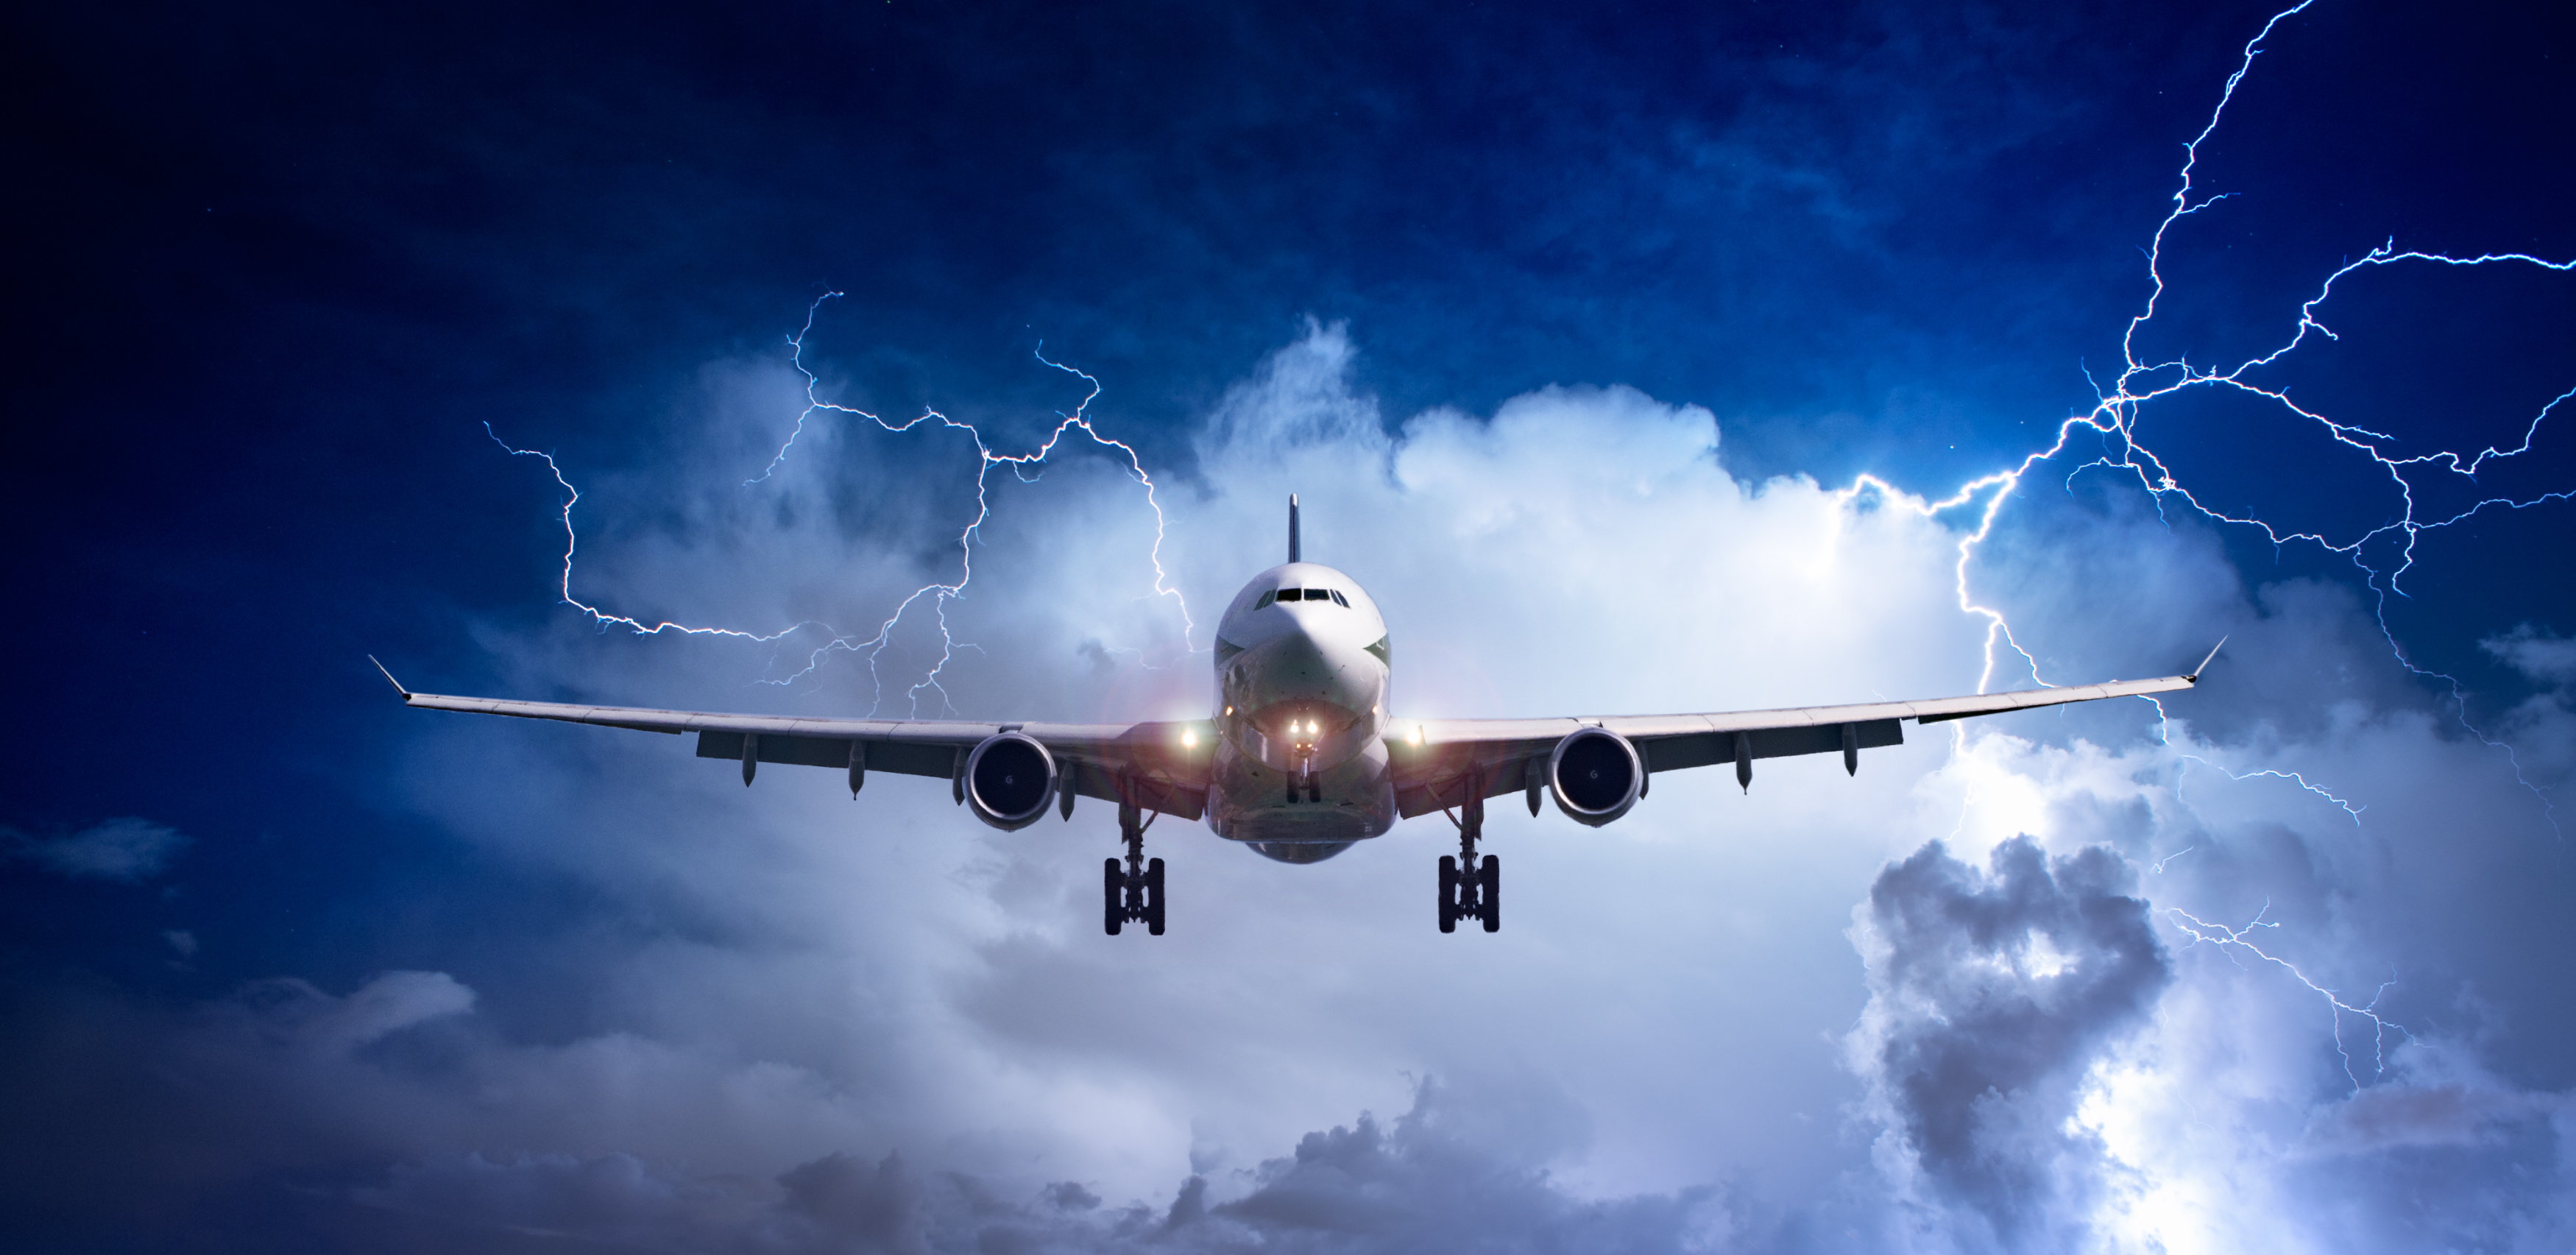 Passenger Airplane Flying Above Sea On Stormy Sky With Dark Clouds And Lightnings.